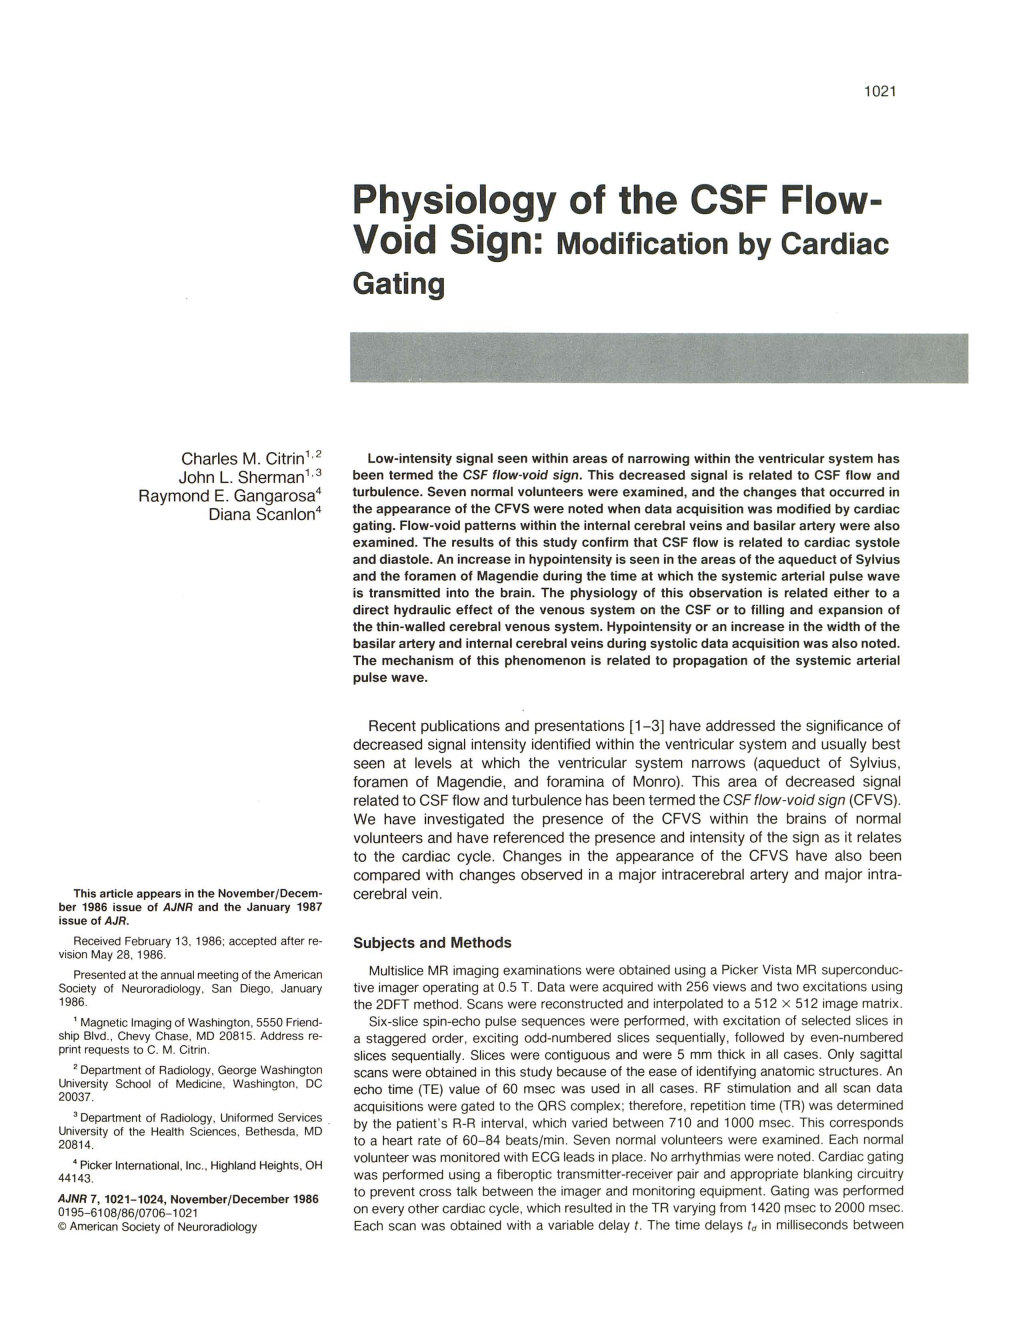 Physiology of the CSF Flow